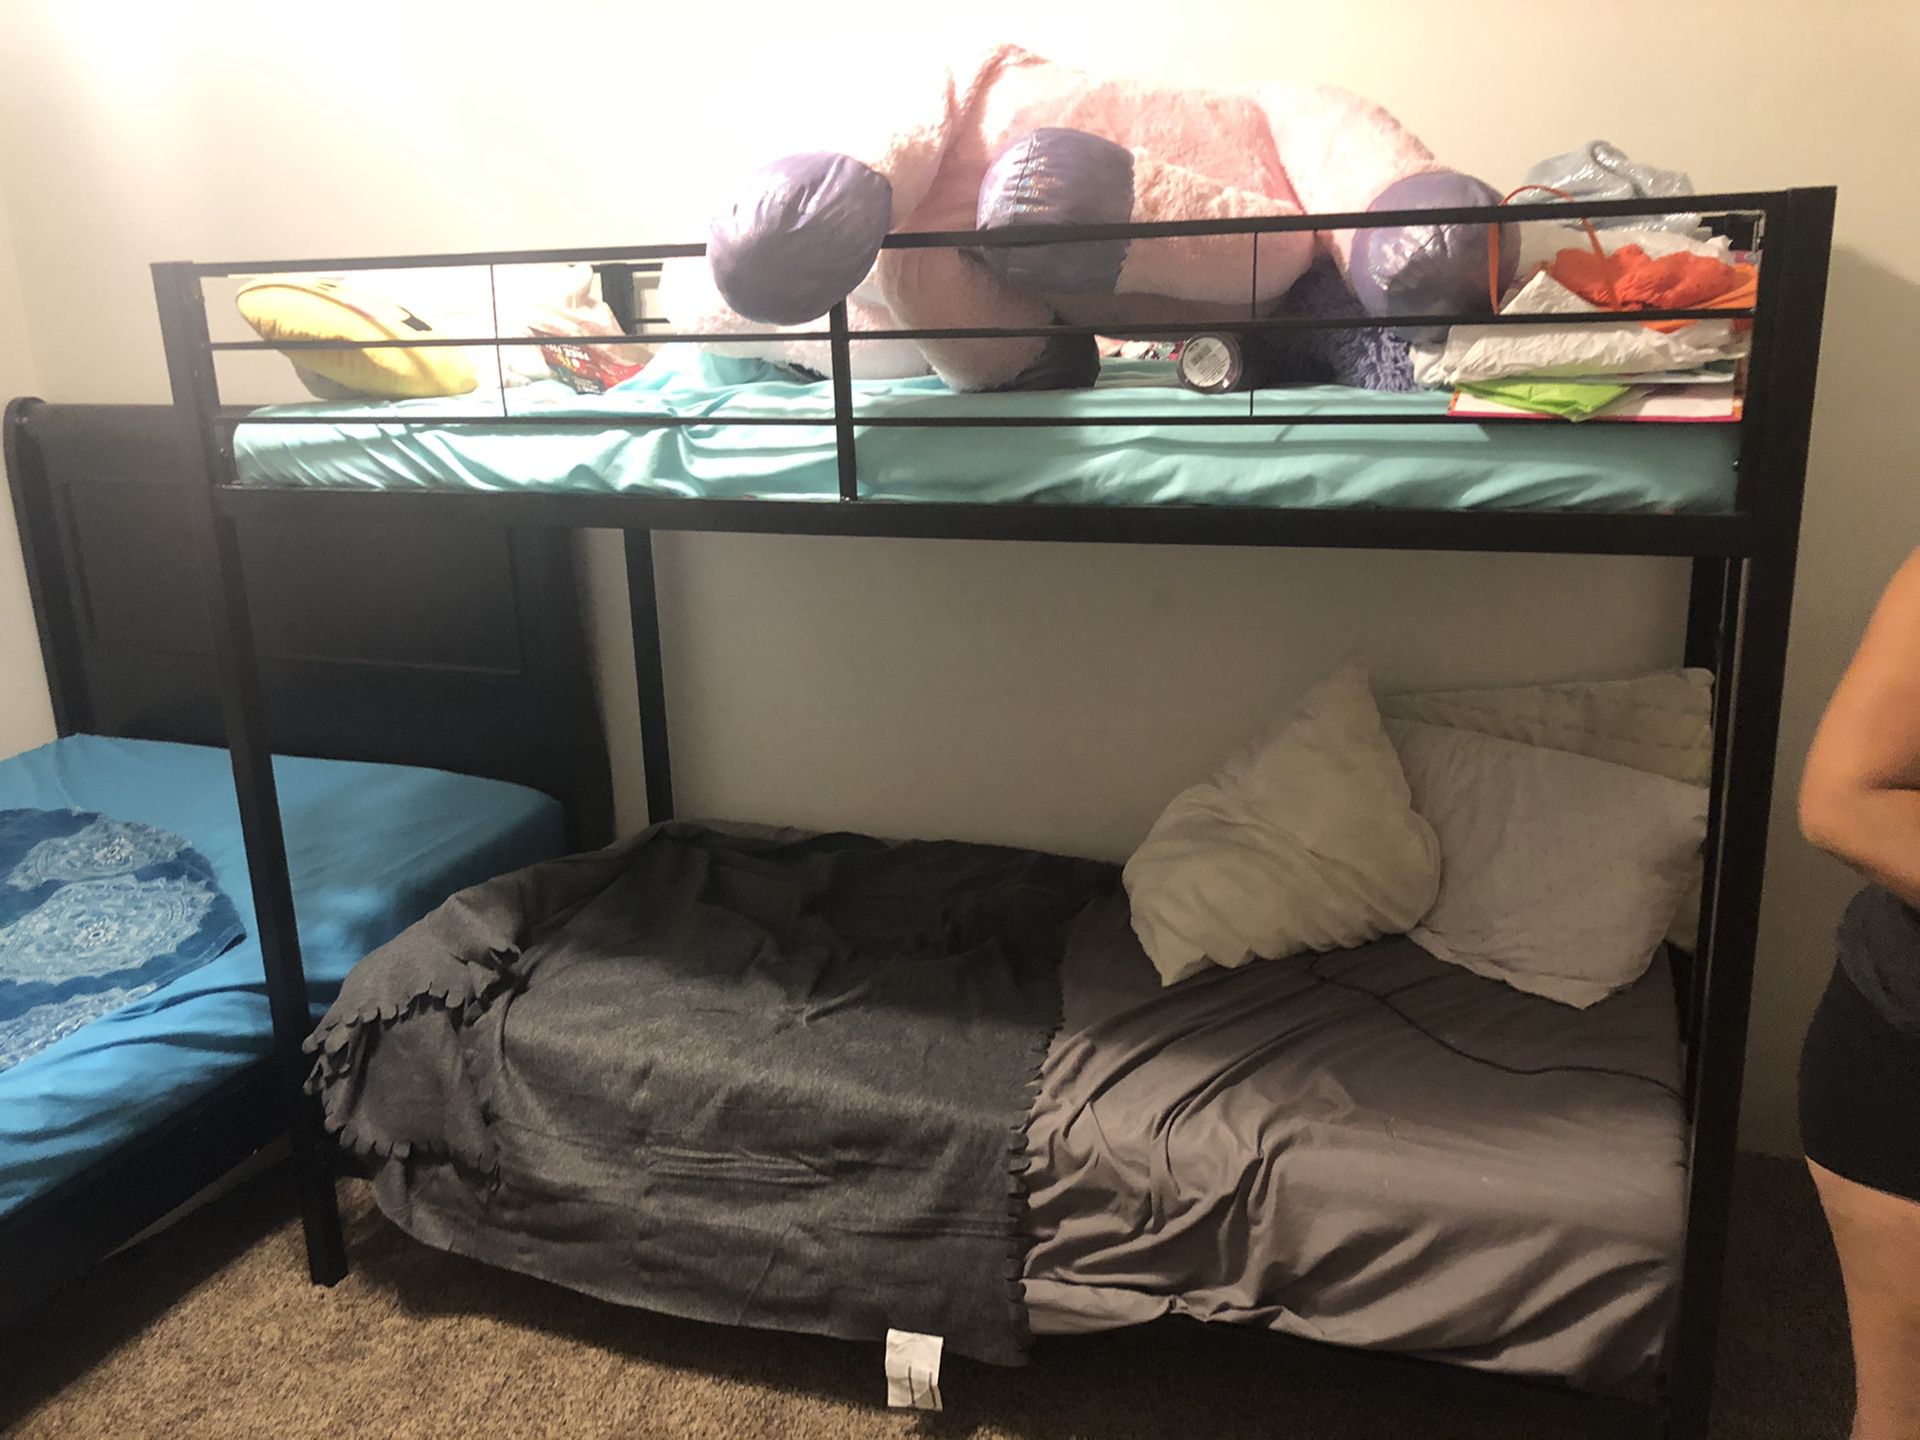 Twin Bunk beds